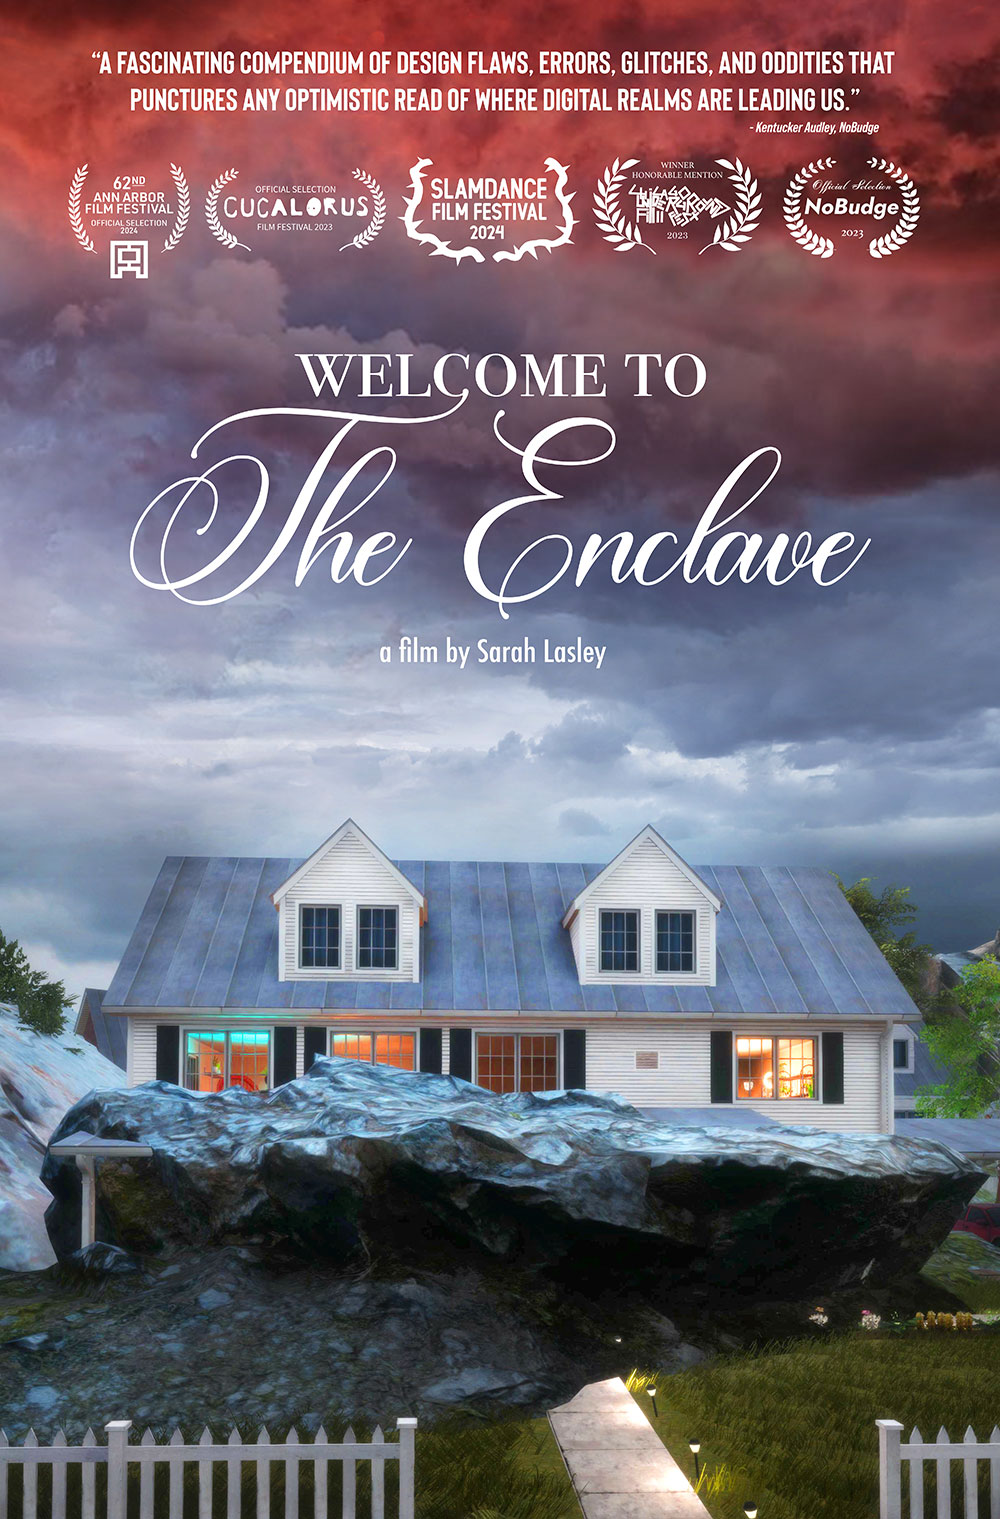 The poster for "Welcome to the Enclave" features a house under stormy skies.